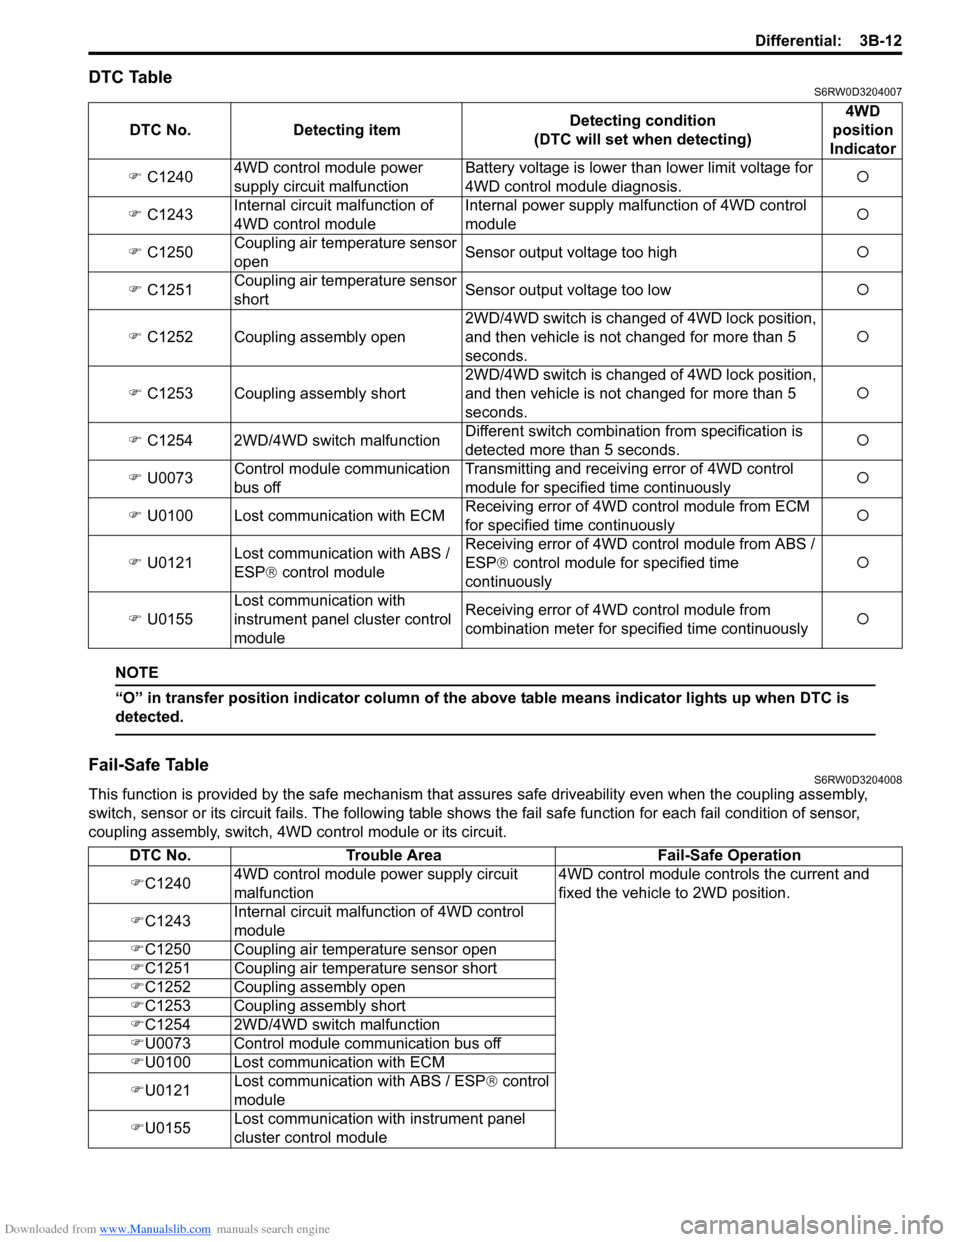 SUZUKI SX4 2006 1.G Service Workshop Manual Downloaded from www.Manualslib.com manuals search engine Differential: 3B-12
DTC TableS6RW0D3204007
NOTE
“O” in transfer position indicator column of the above table means indicator lights up when